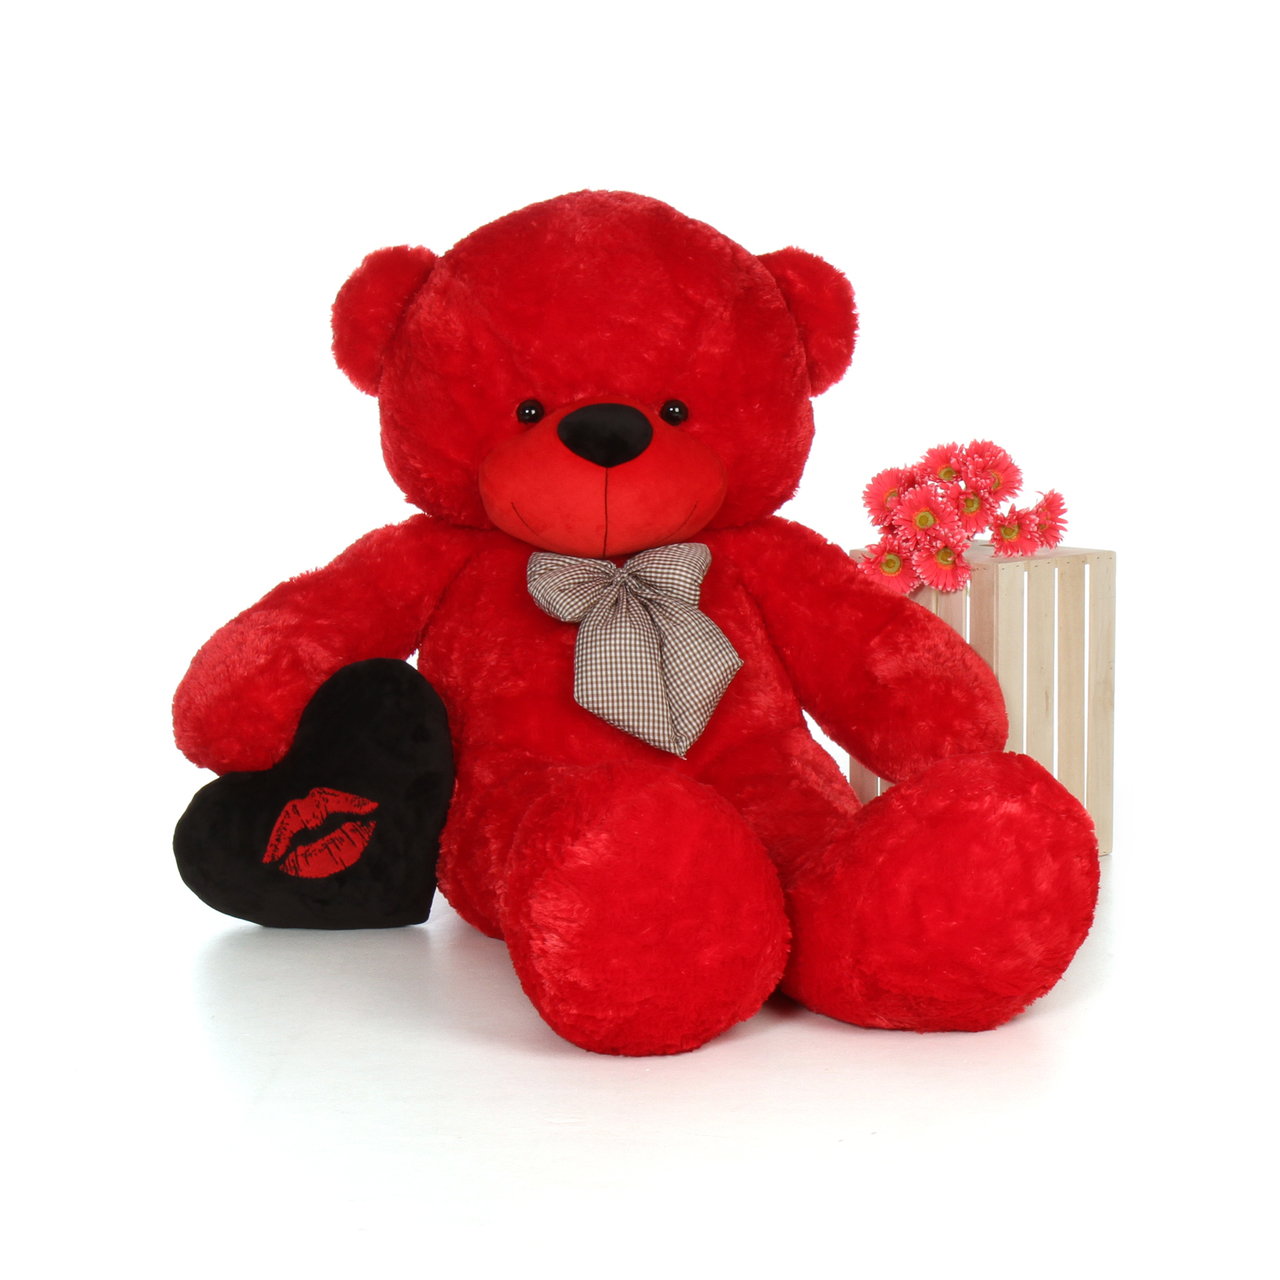 black and red teddy bear